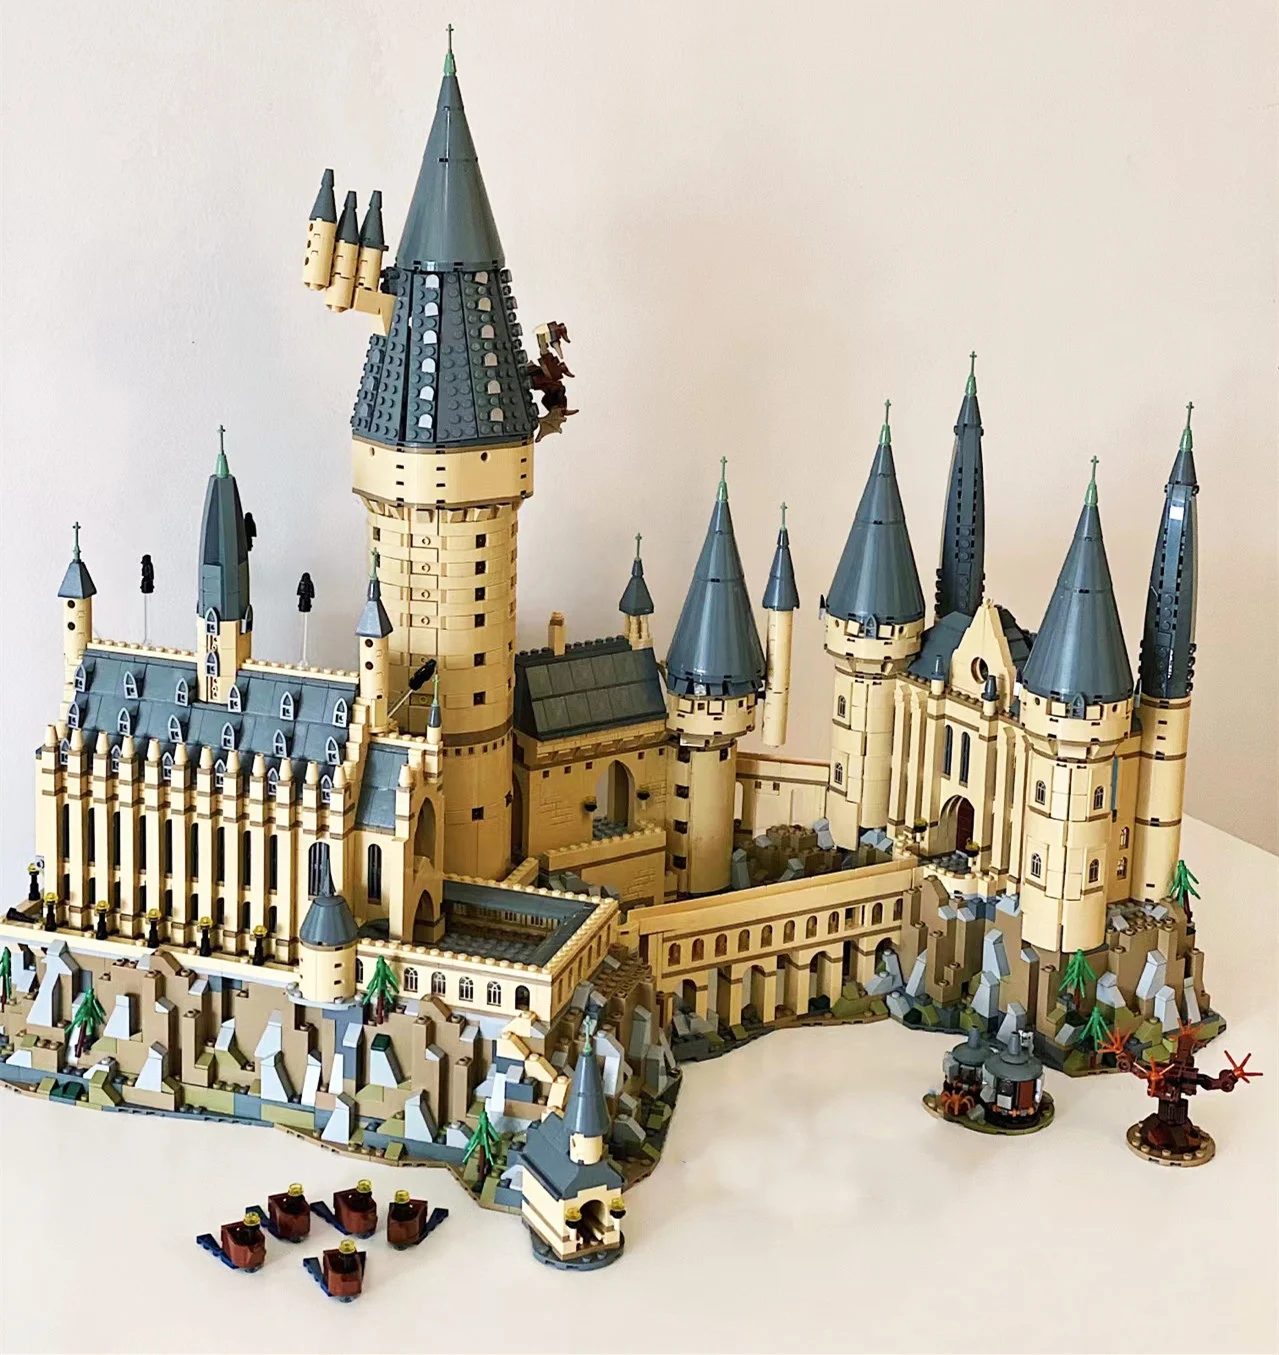 

In Stock Movie Series Magic School Castle Model Compatible 71043 Building Blocks Bricks Toys For Kids Christmas Birthday Gifts